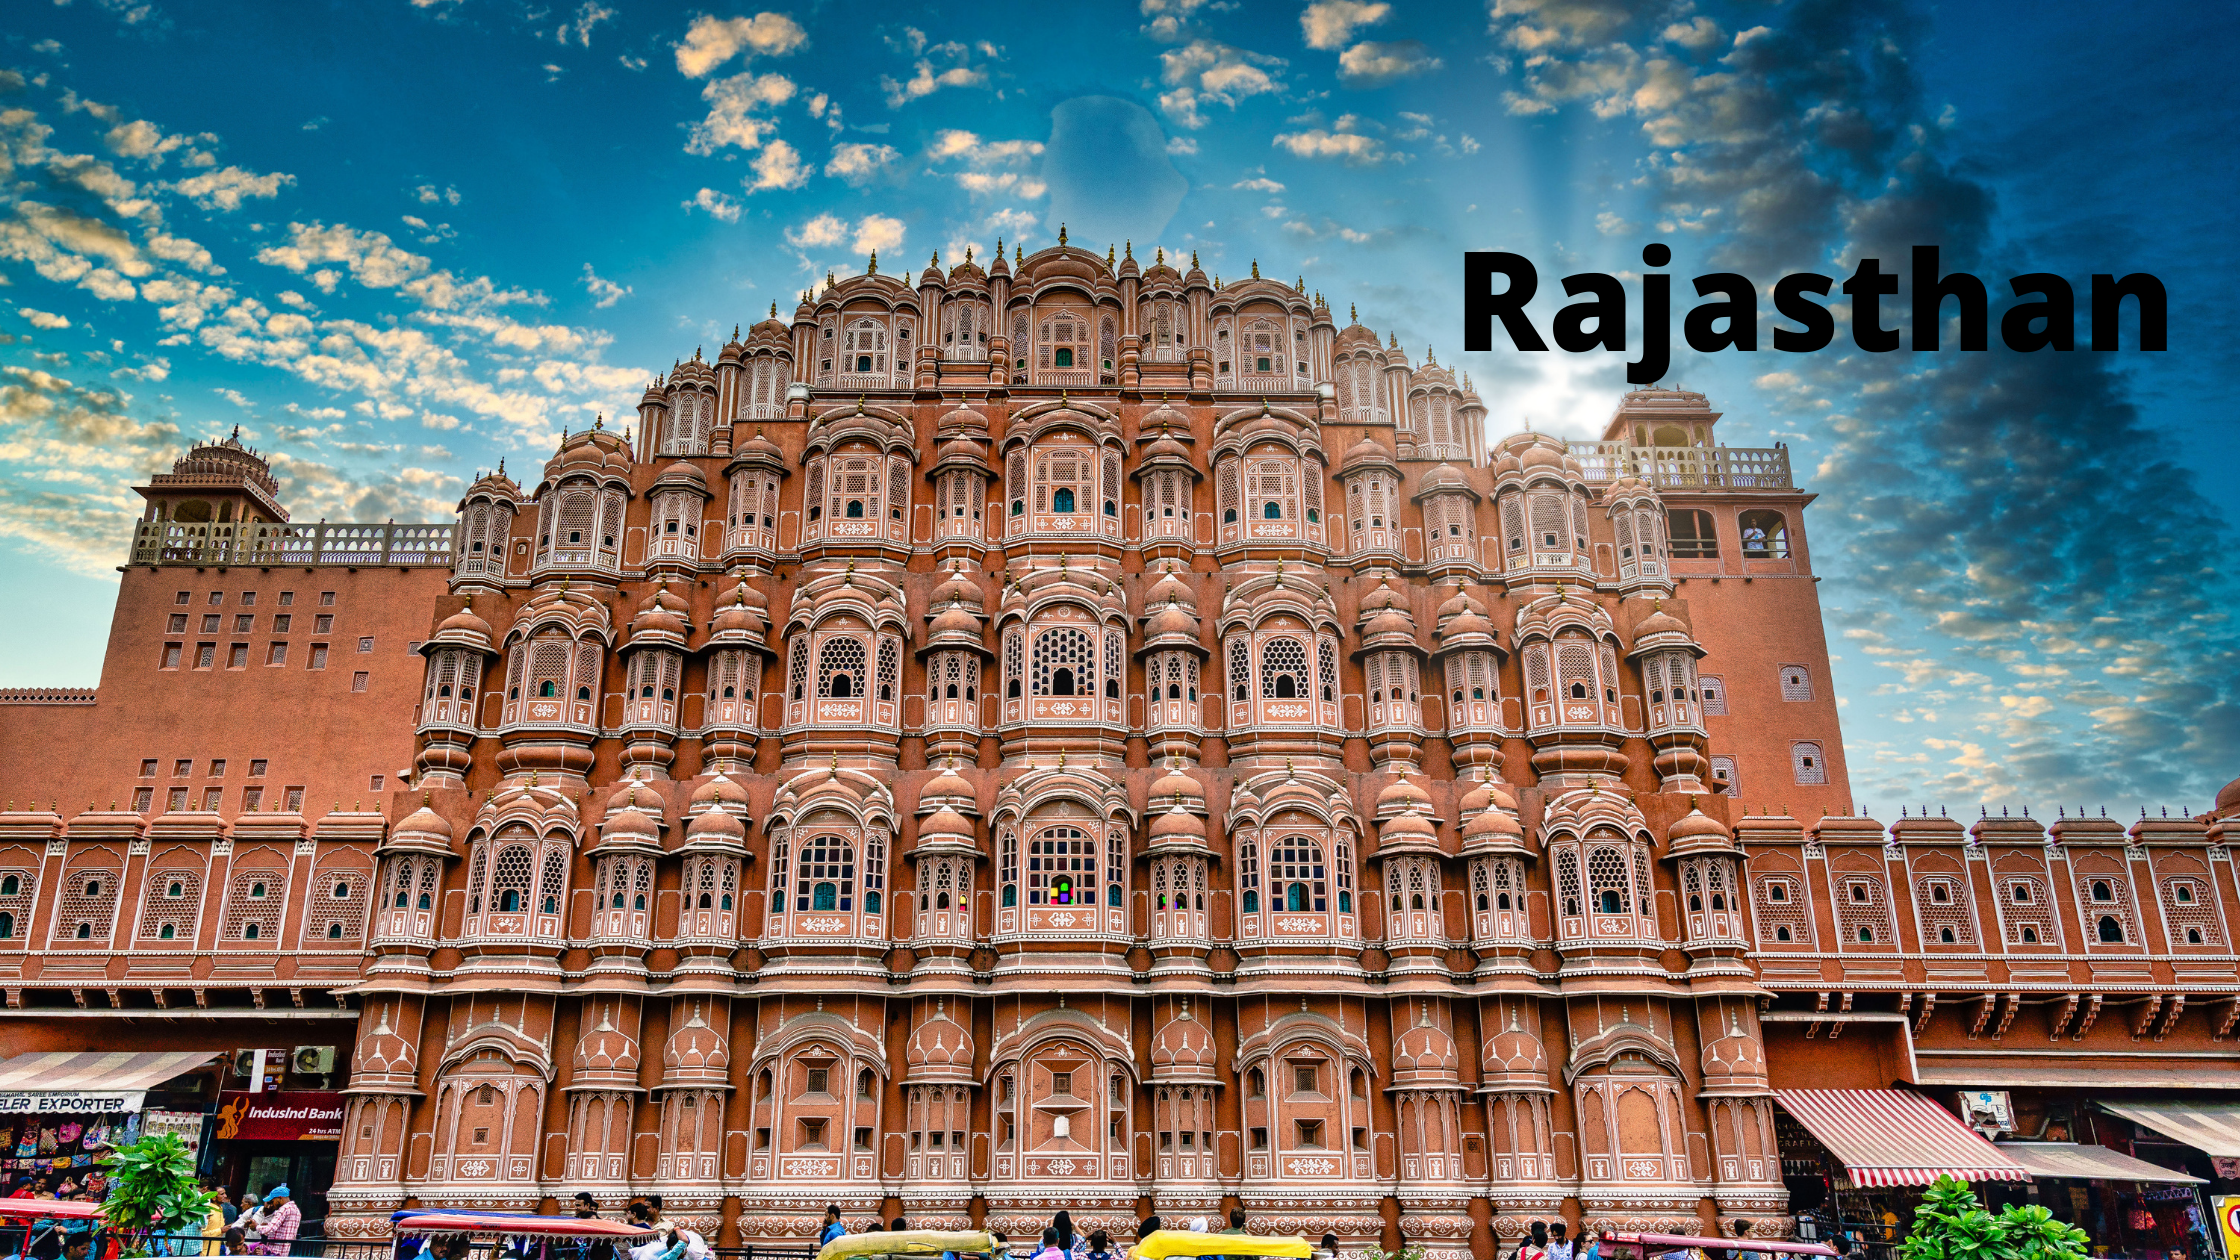 What is the best time to visit Rajasthan?